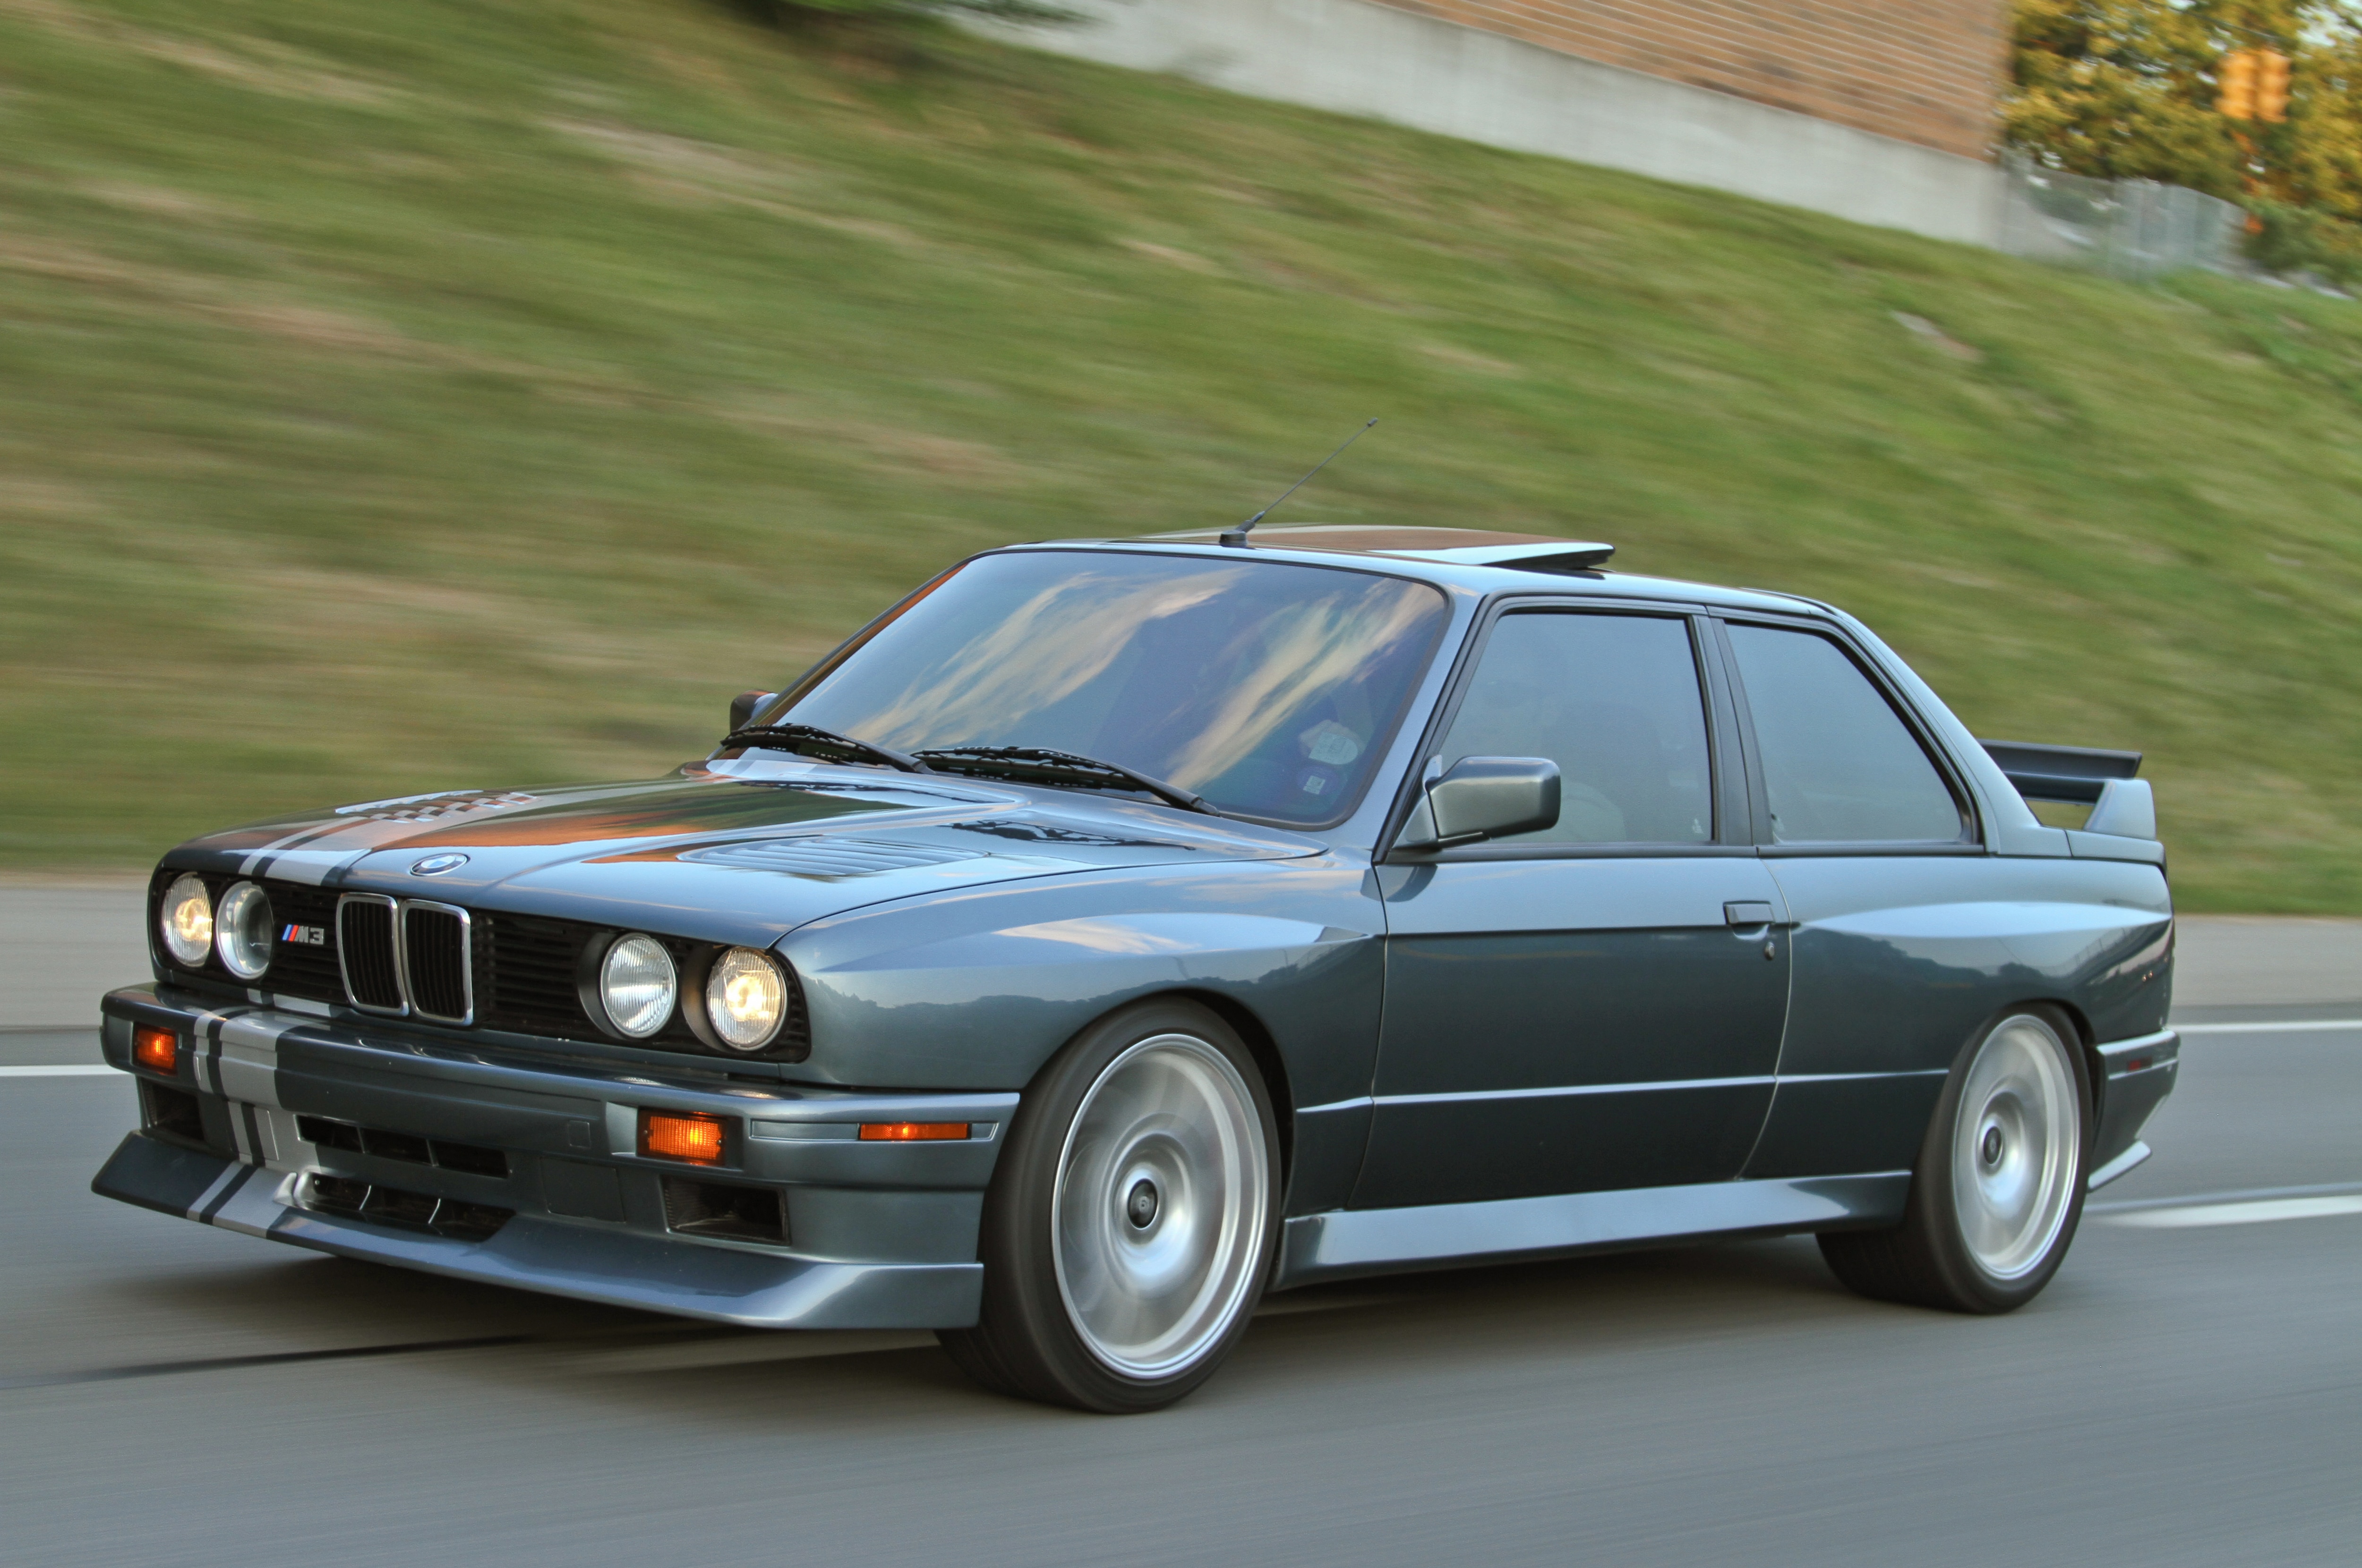 Kevin Byrd’s LS-Swapped BMW "E30" M3 - Hot Rod Network